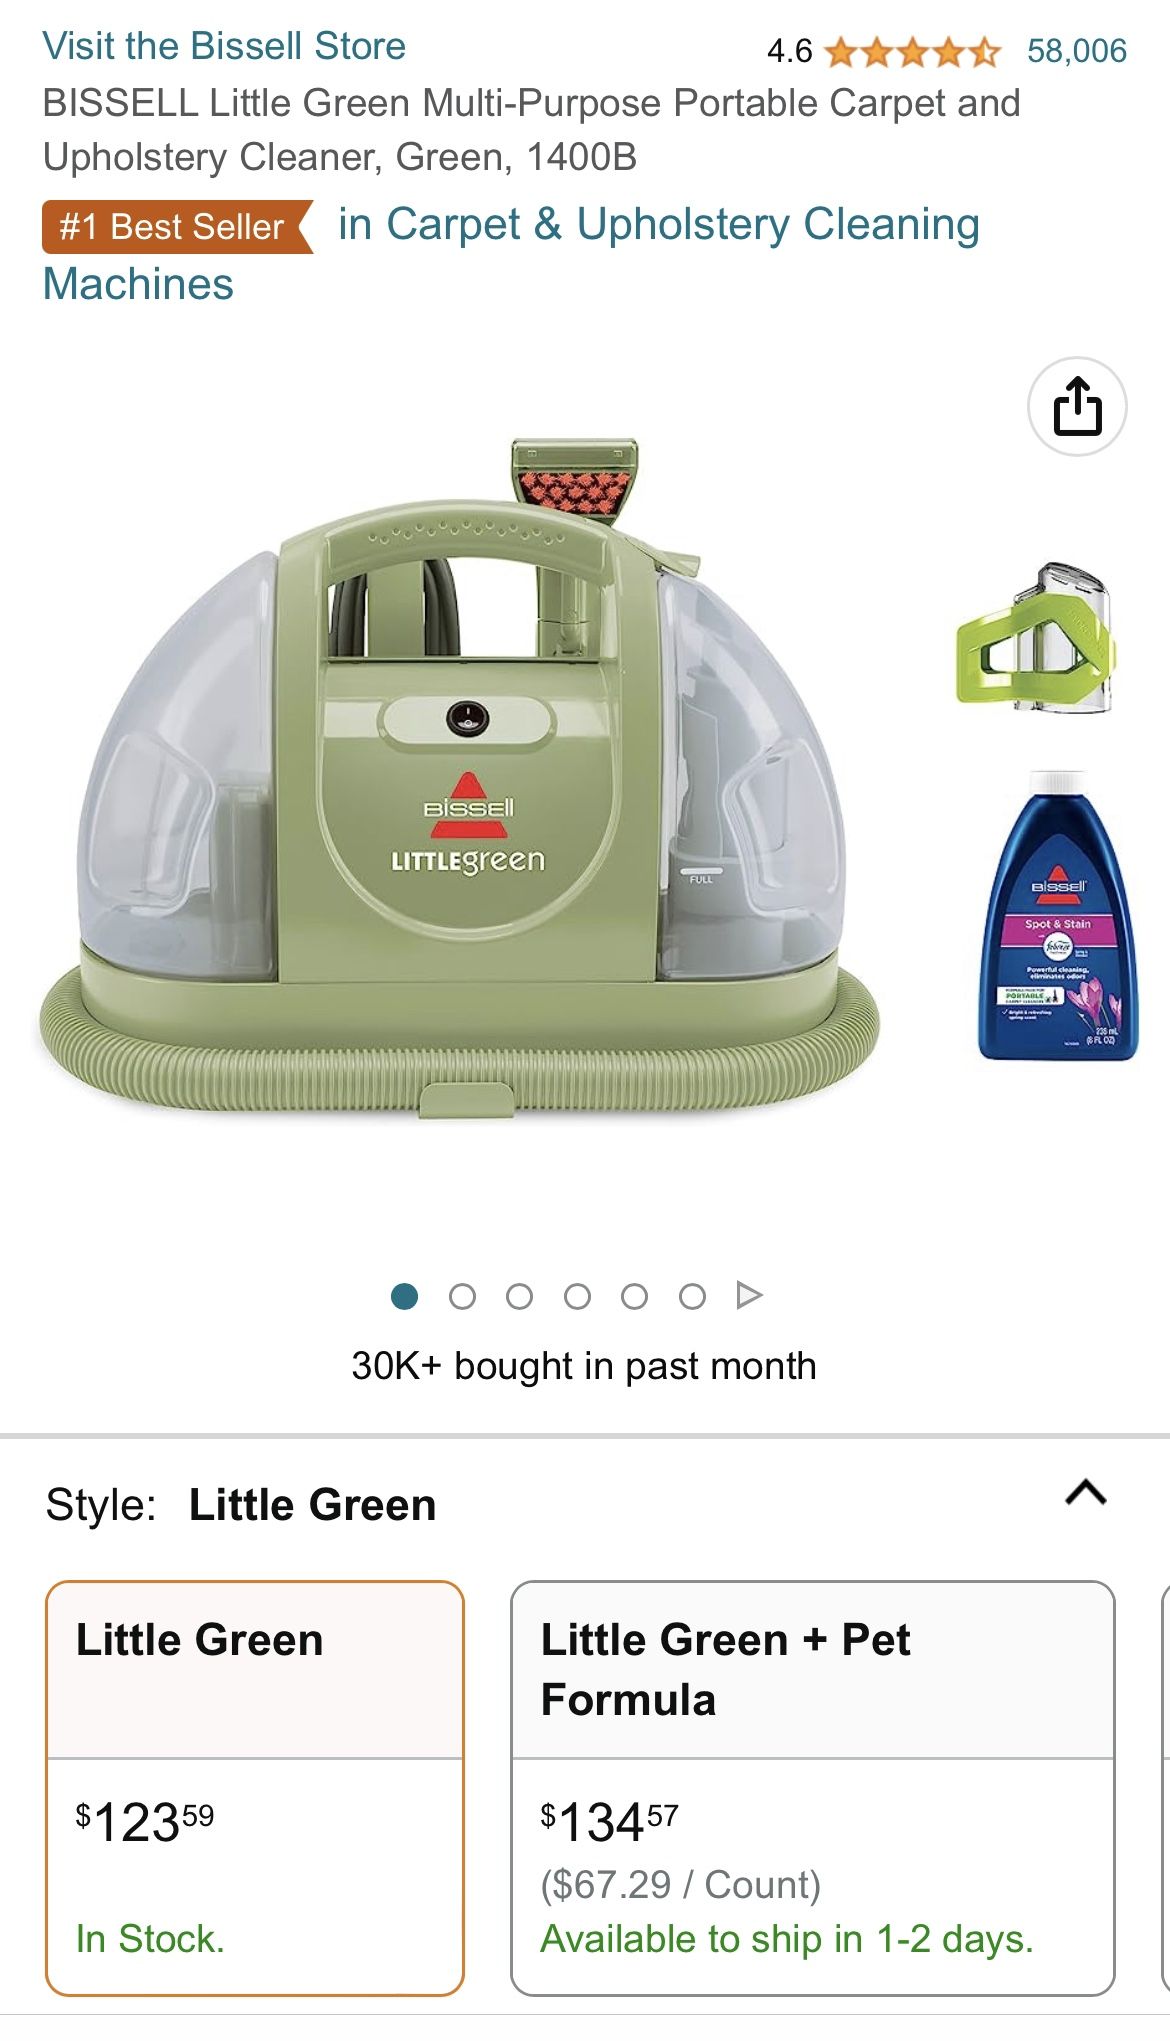 NEW in Box! BISSELL Little Green Portable Carpet And Upholstery Cleaner